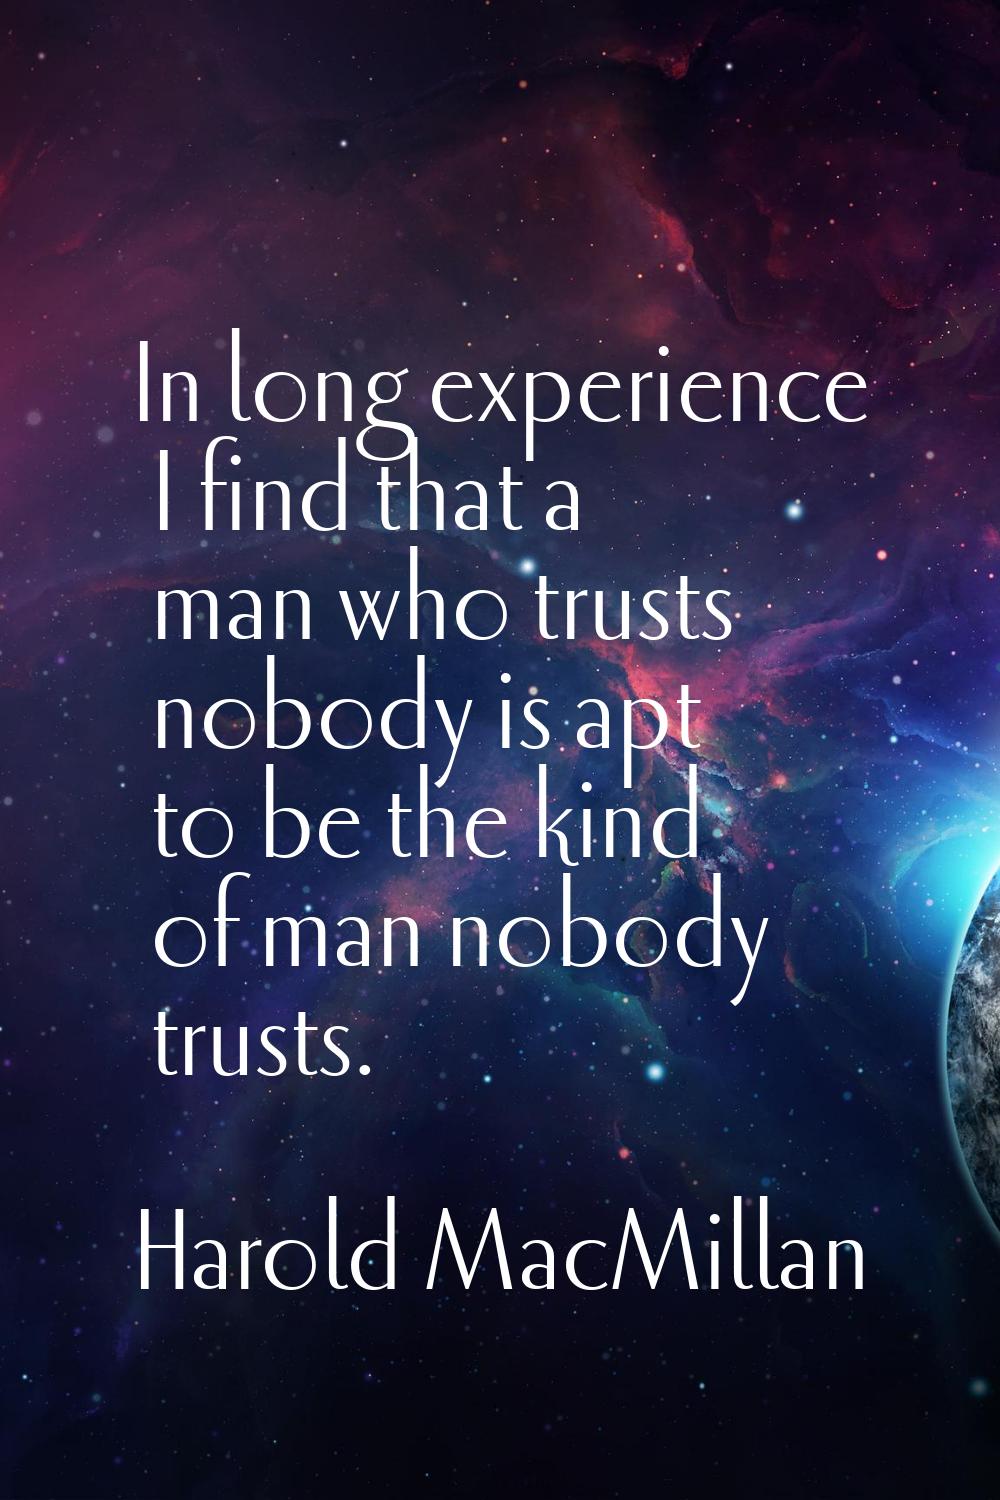 In long experience I find that a man who trusts nobody is apt to be the kind of man nobody trusts.